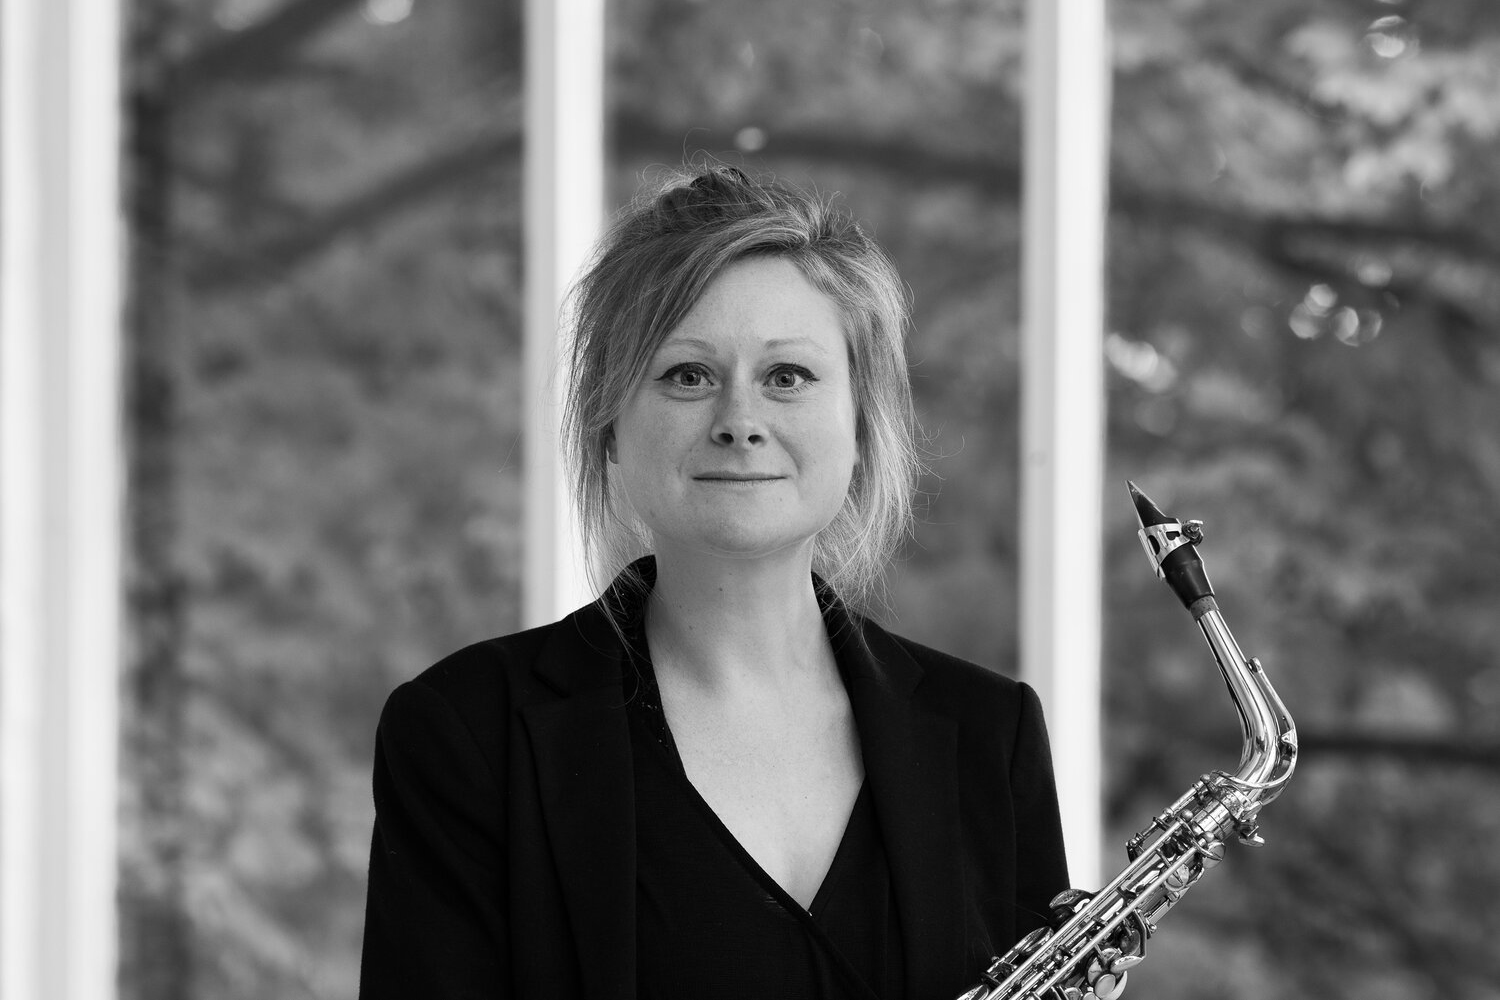 A black and white image of a woman looking into the camera and holding a saxophone